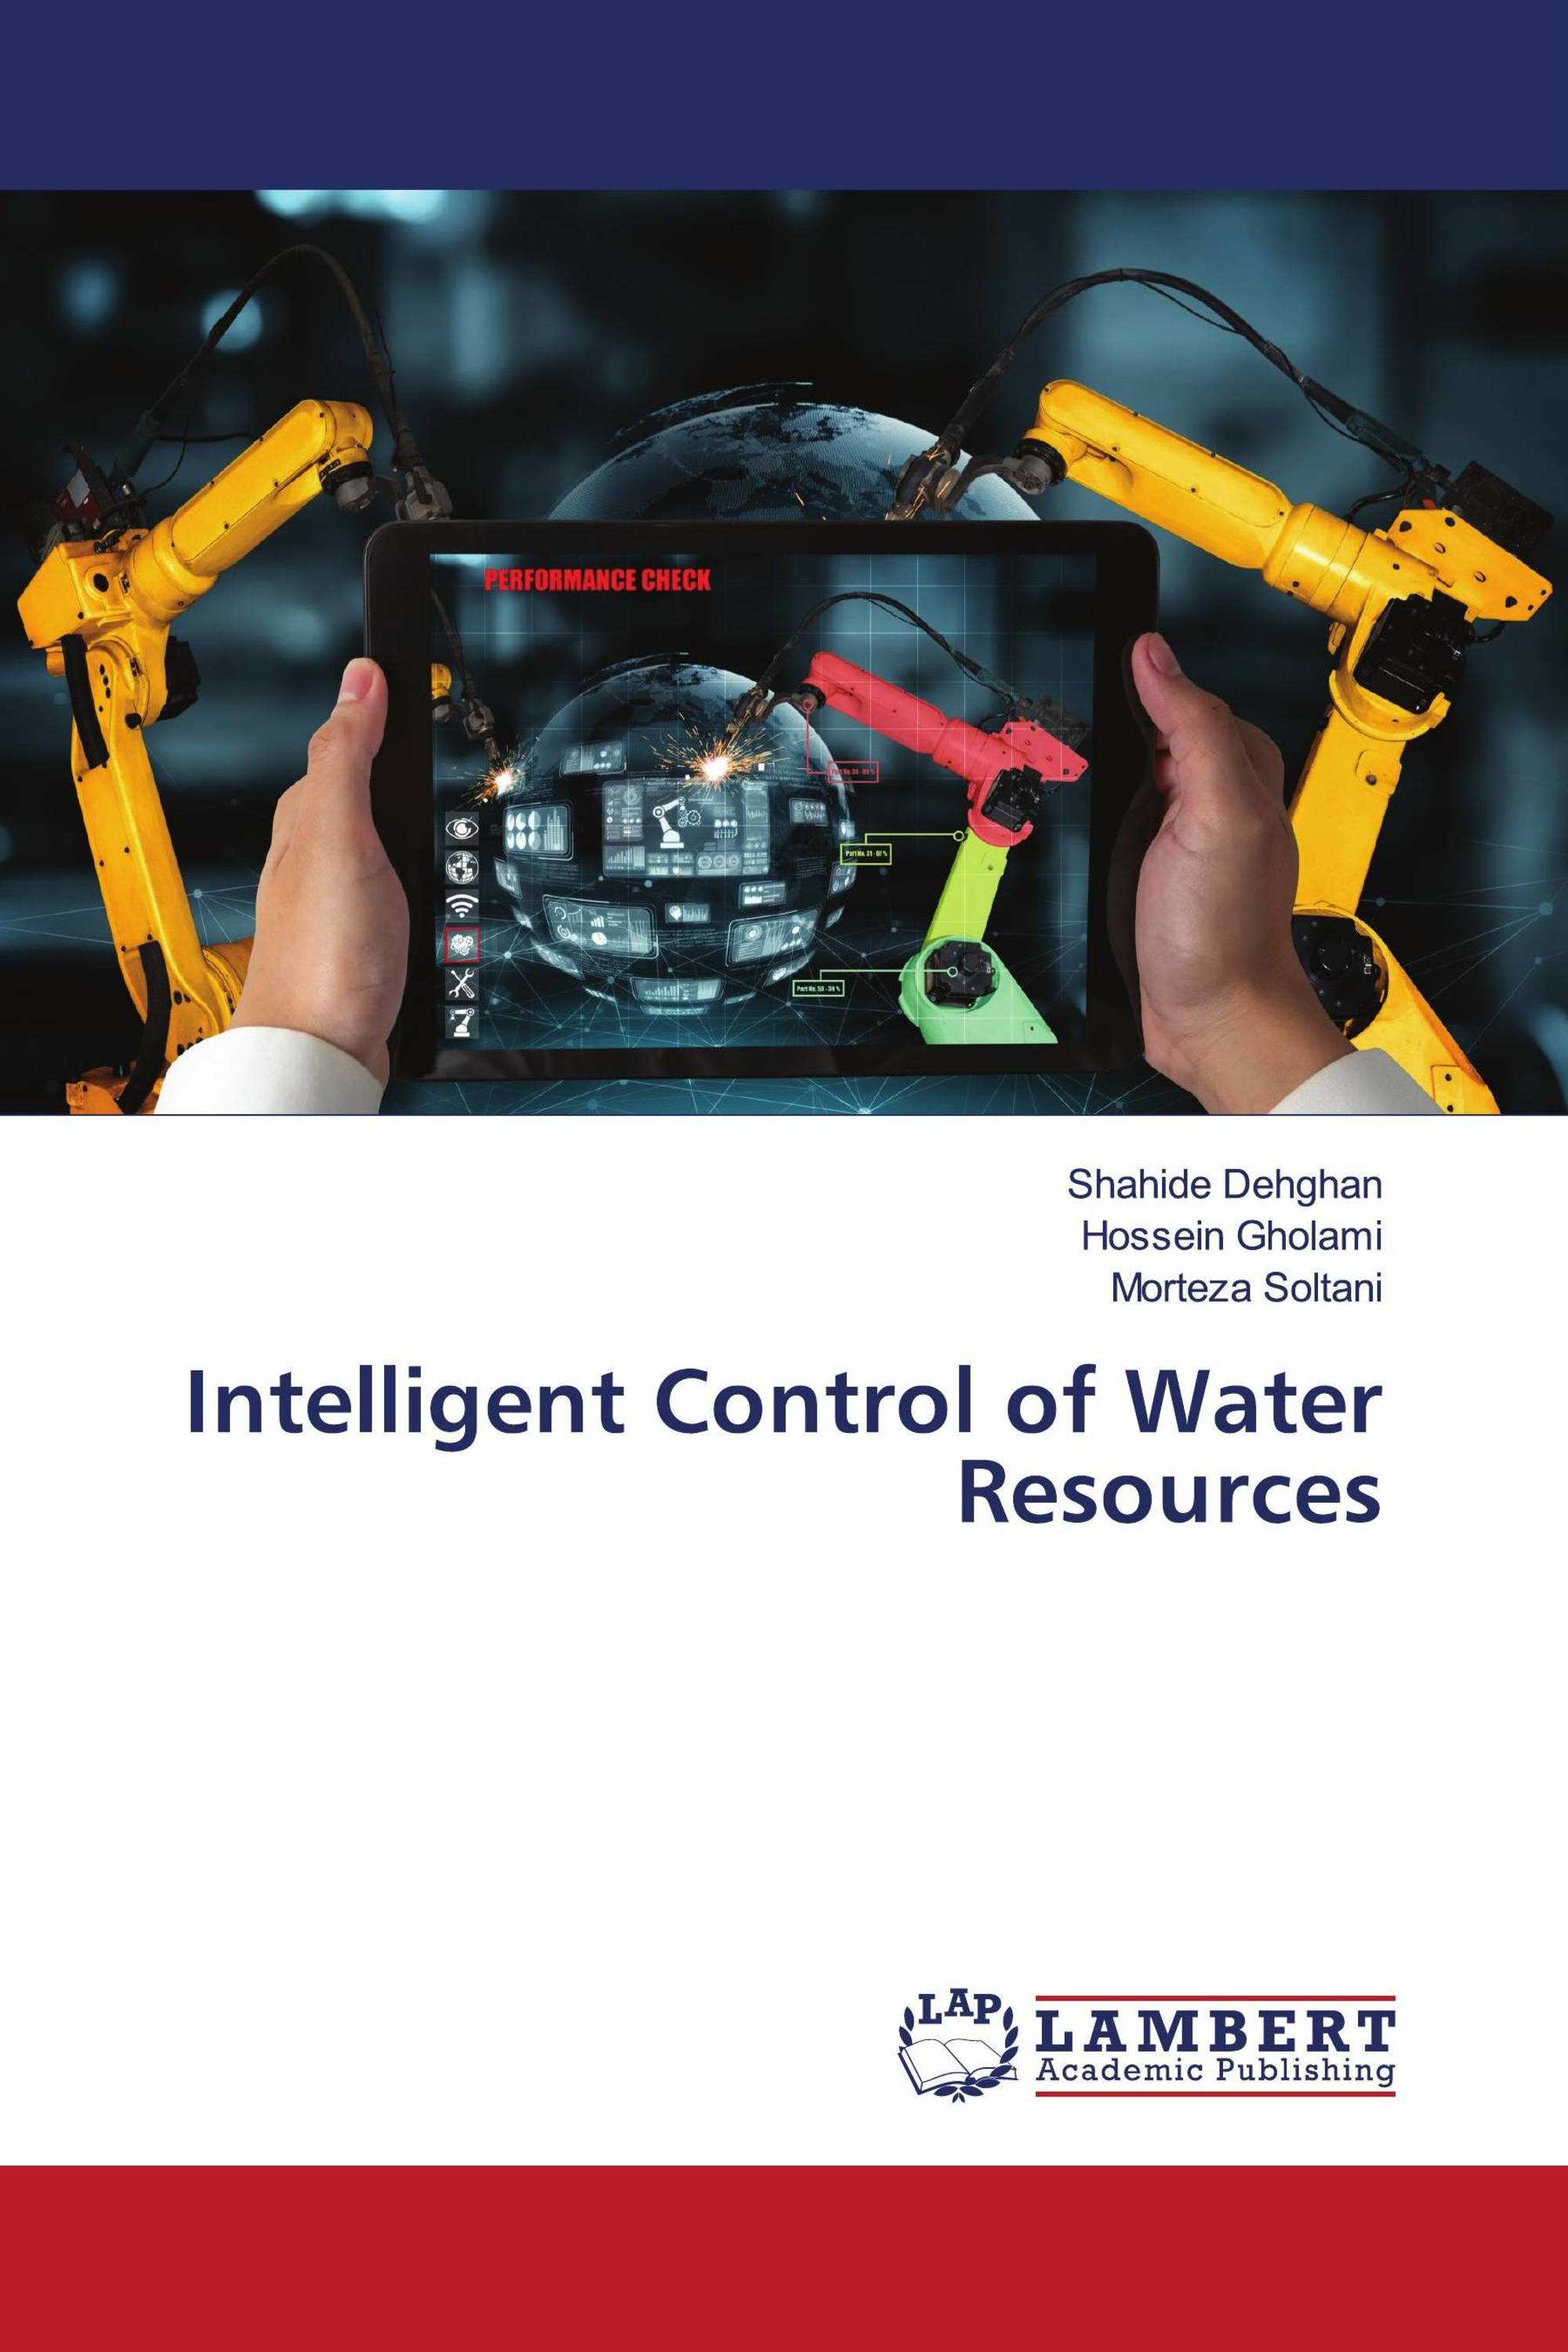 Intelligent Control of Water Resources